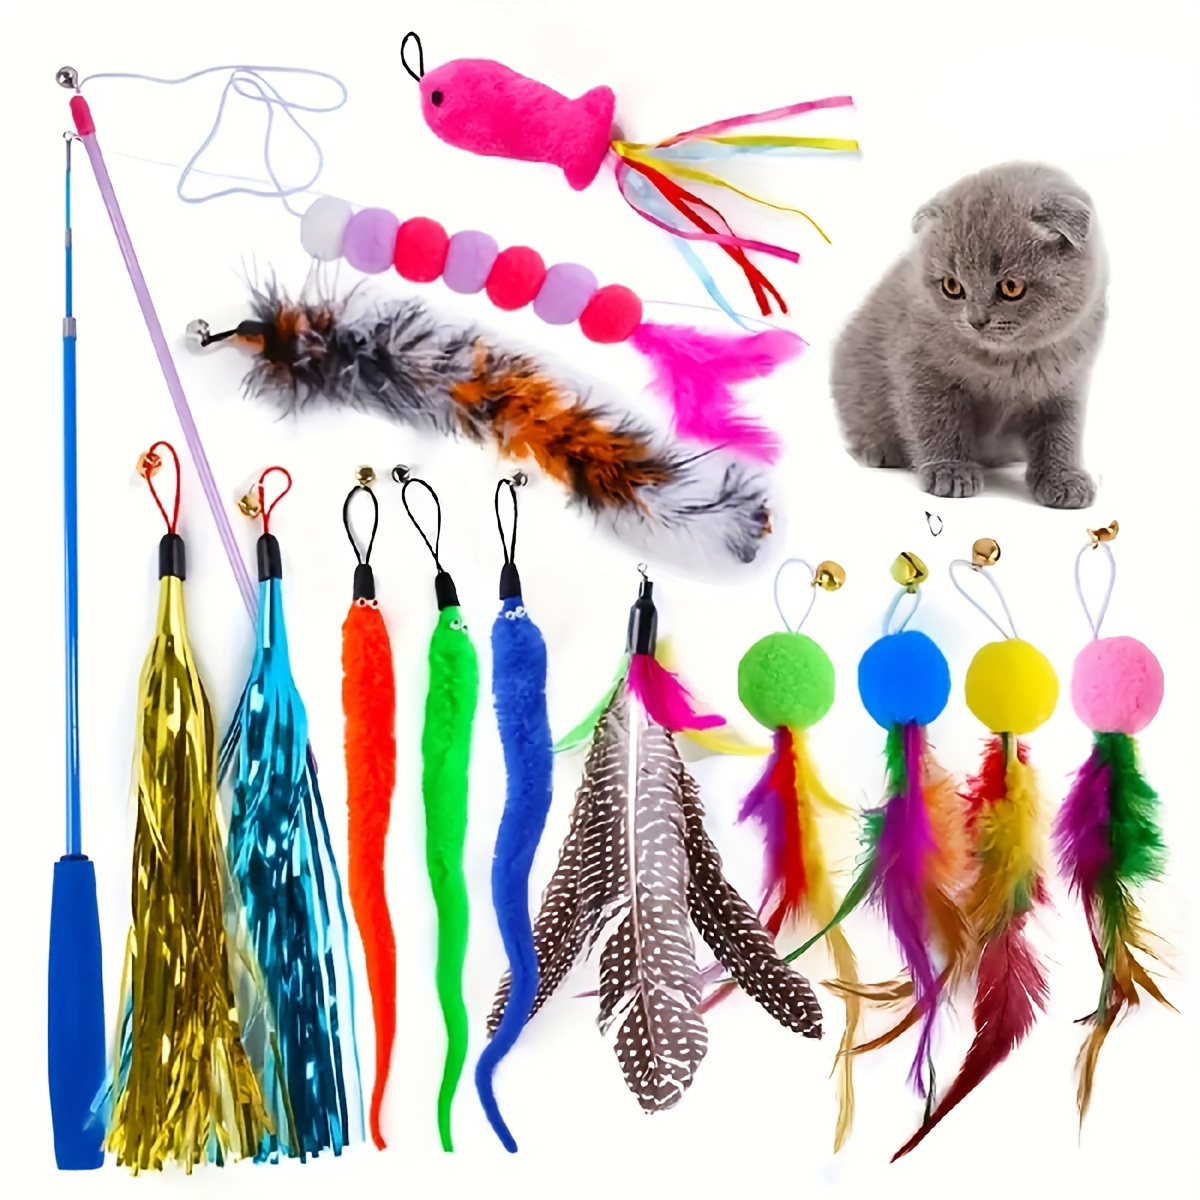 ESTINK 7 Pcs Cat Stick Toy Set Retractable With Feather Fishing Pole Bells  Cat Wand Toy Set For Indoor Kittens,Cat Wand Toy Set With Feathers,Fishing